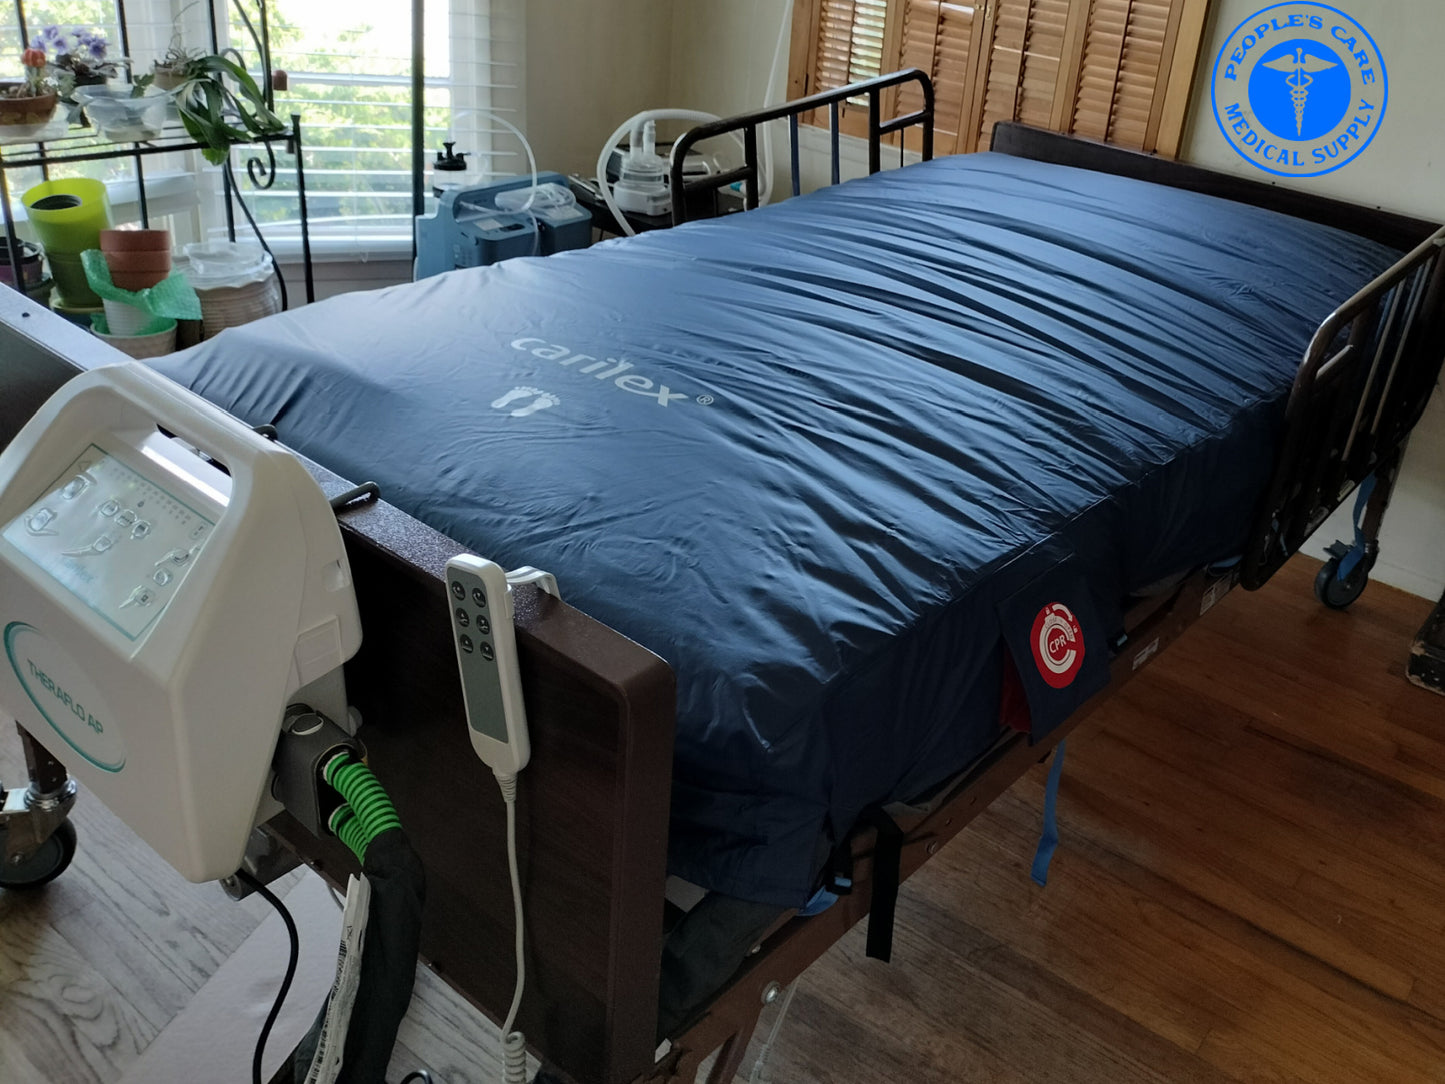 Deluxe Homecare Hospital Bed Rental near me